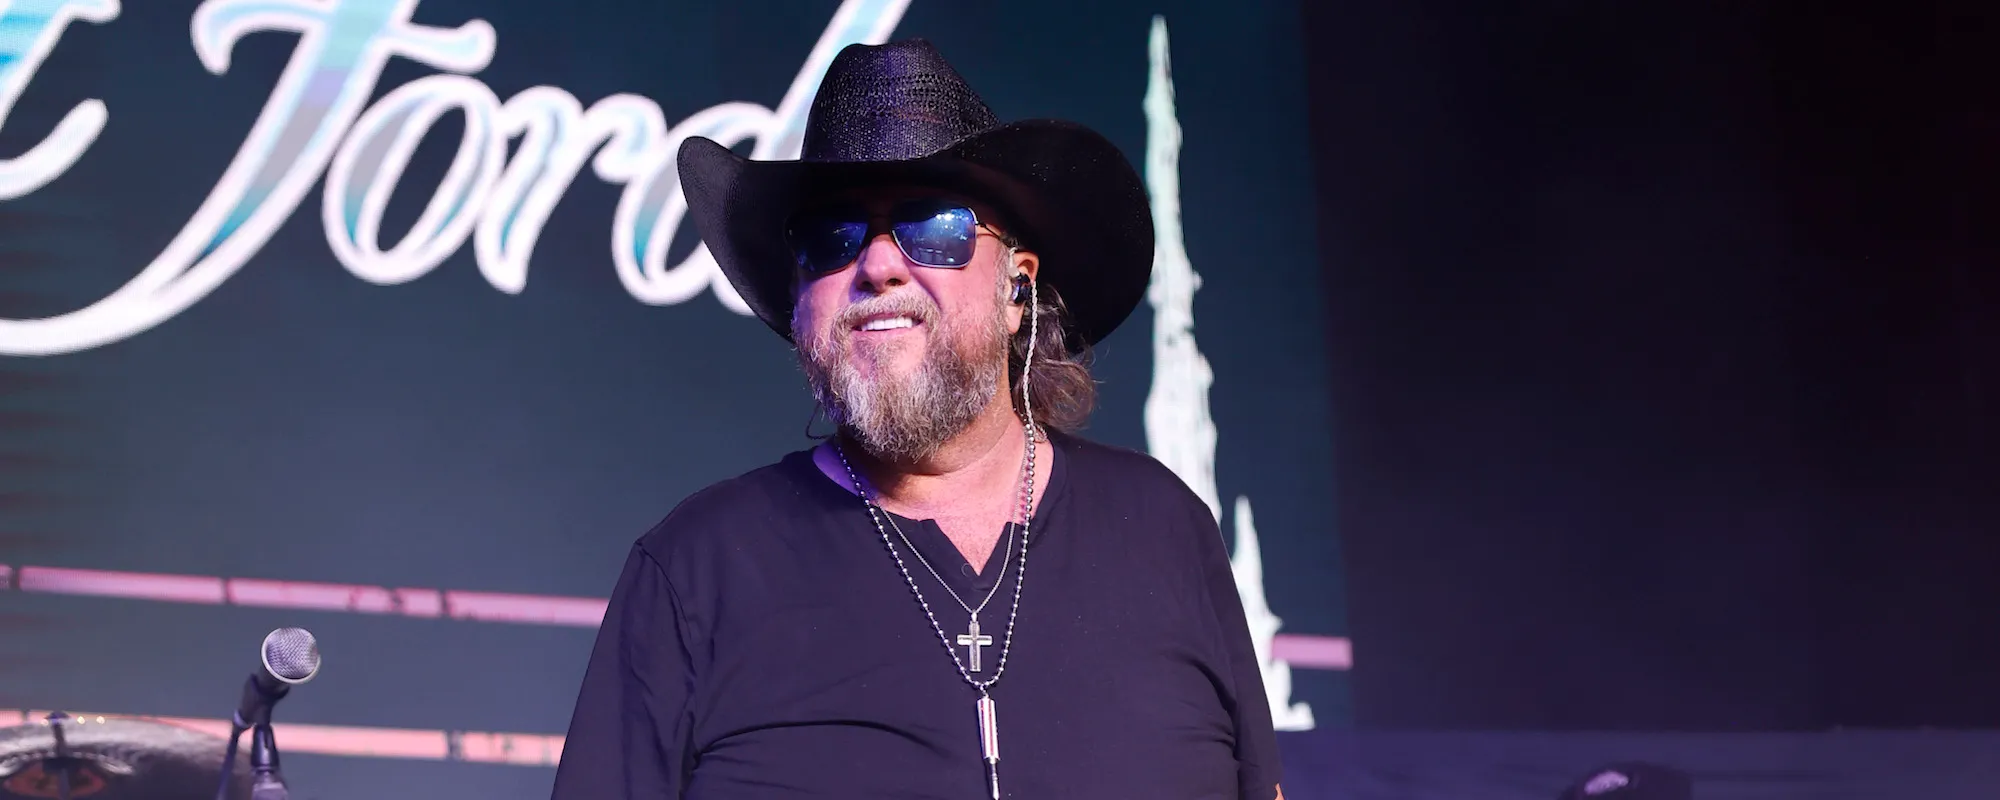 How Colt Ford Helped Jason Aldean Land a Country-Rap Hit With “Dirt Road Anthem”